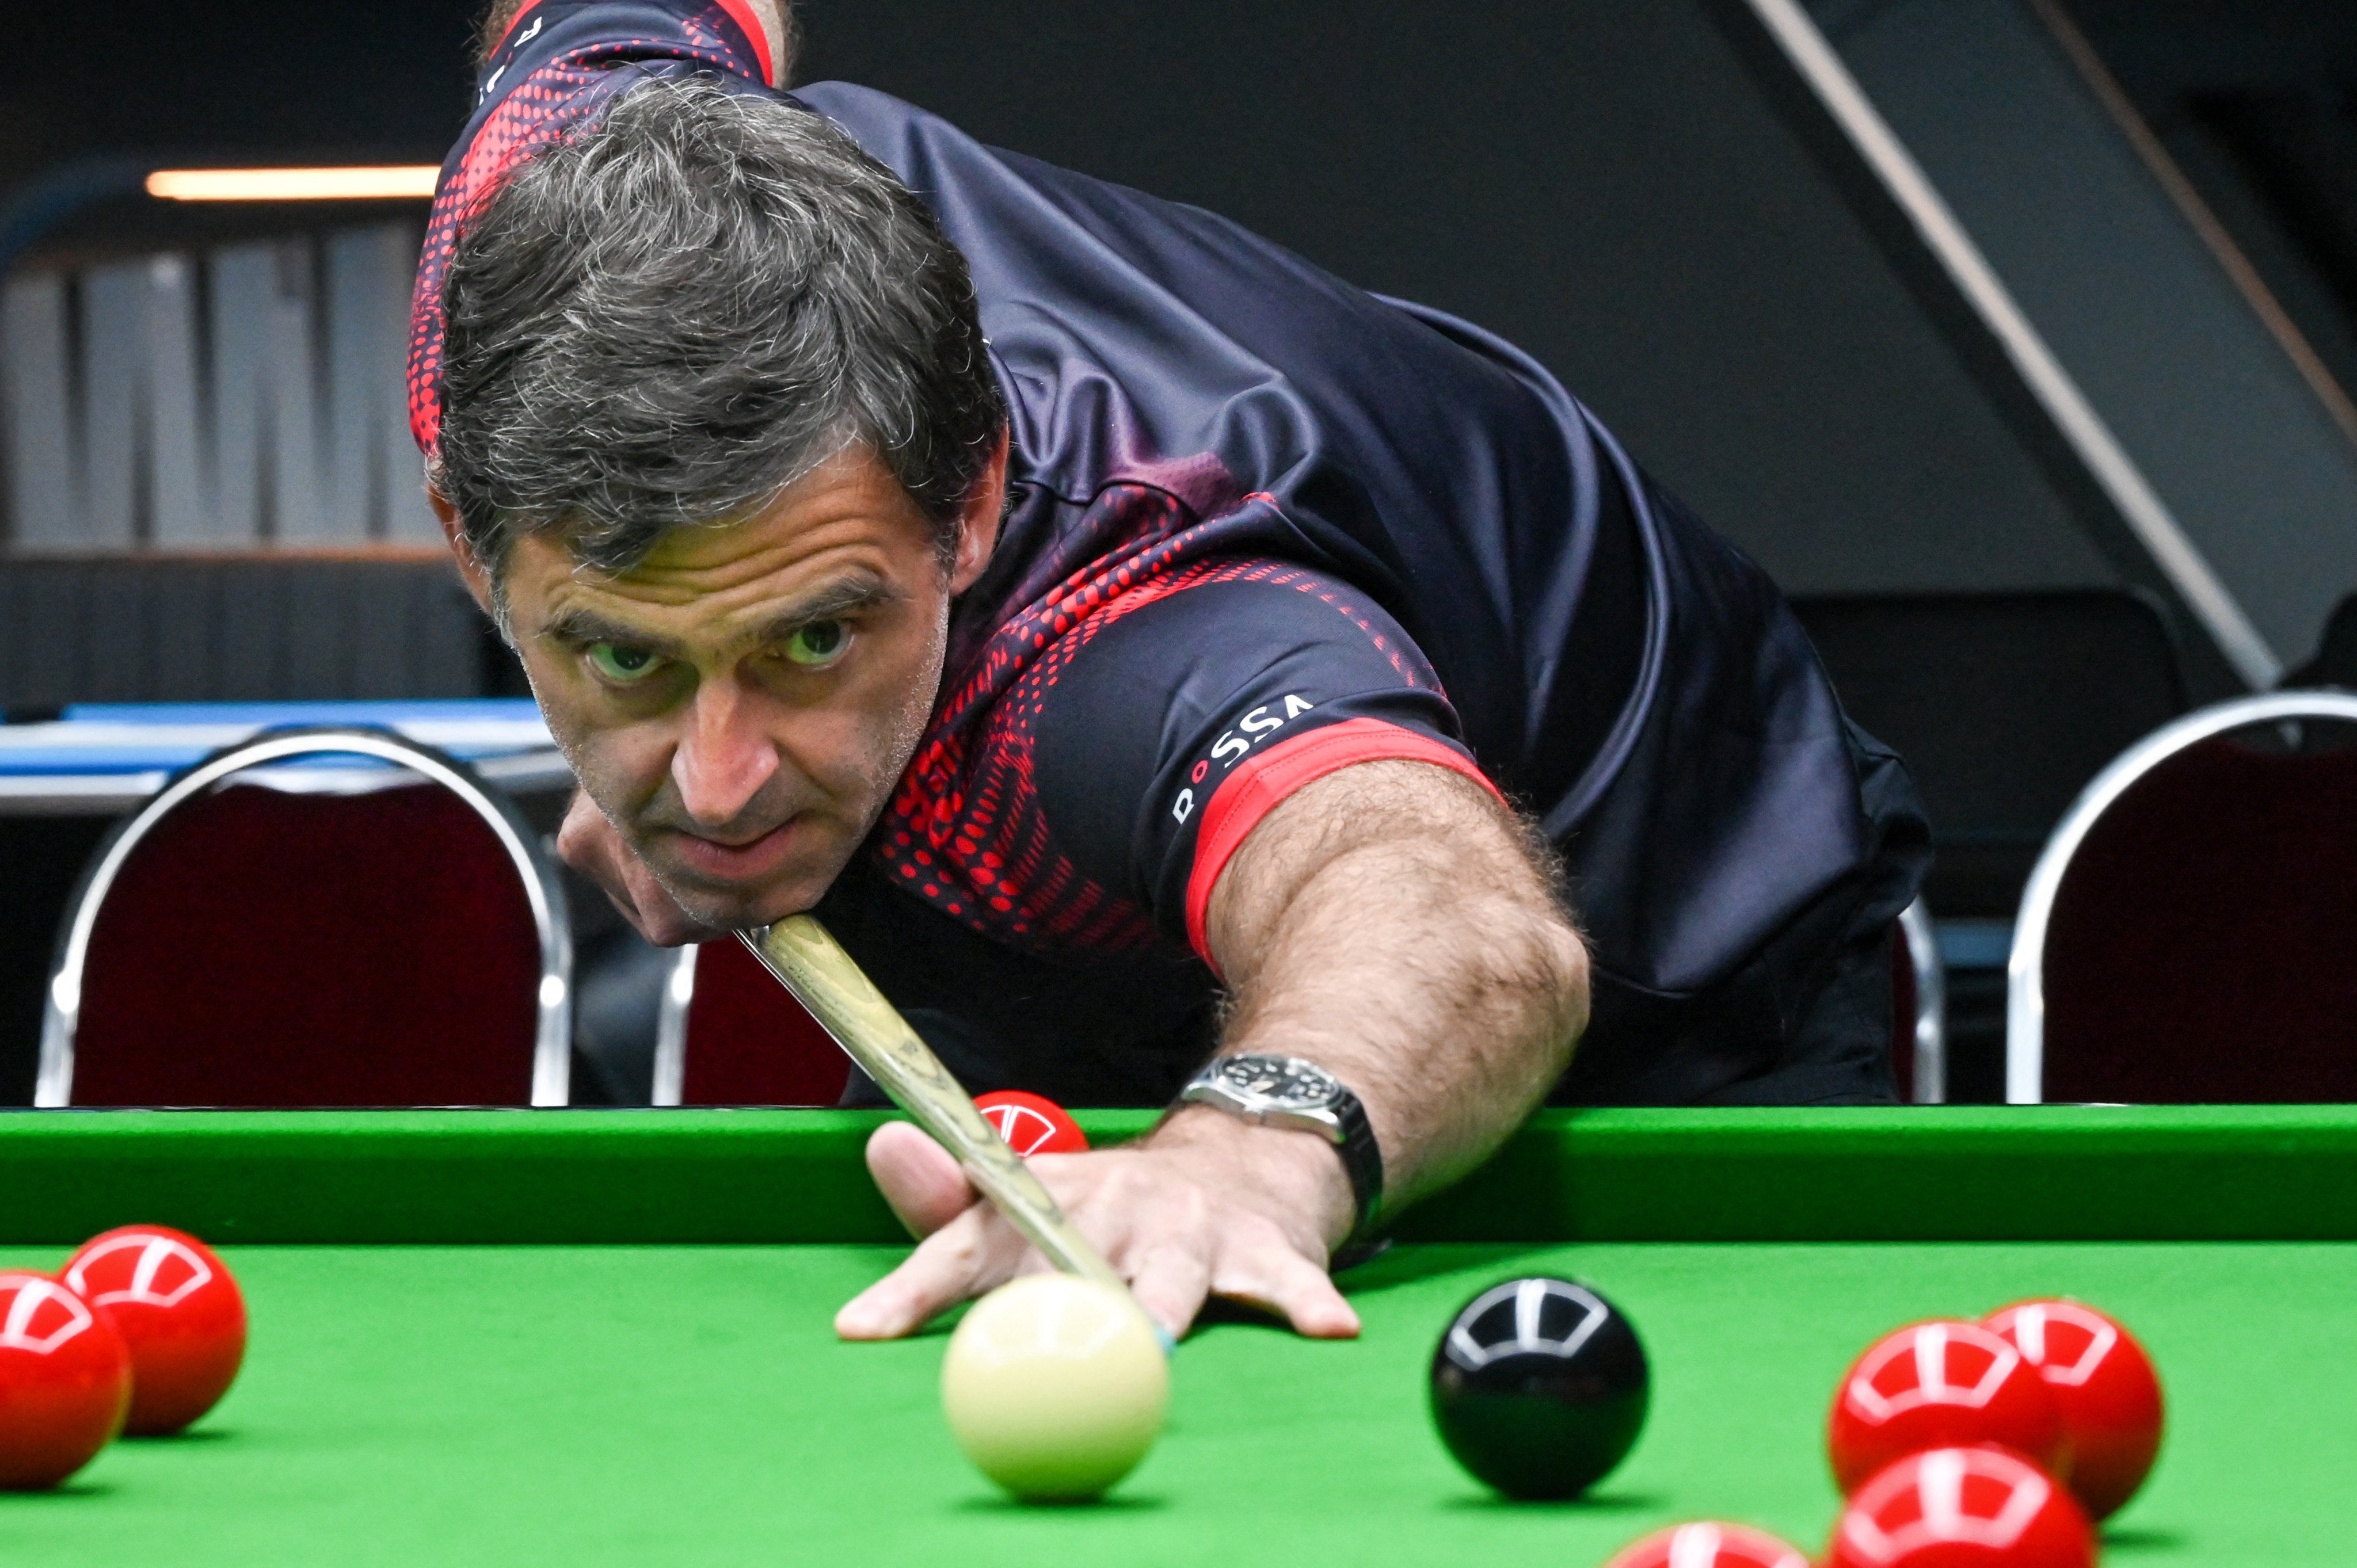 World No 1 and seven-time world champion Ronnie O’Sullivan demonstrates during a snooker lesson at his newly opened academy in Singapore on June 13, 2022. Photo: AFP